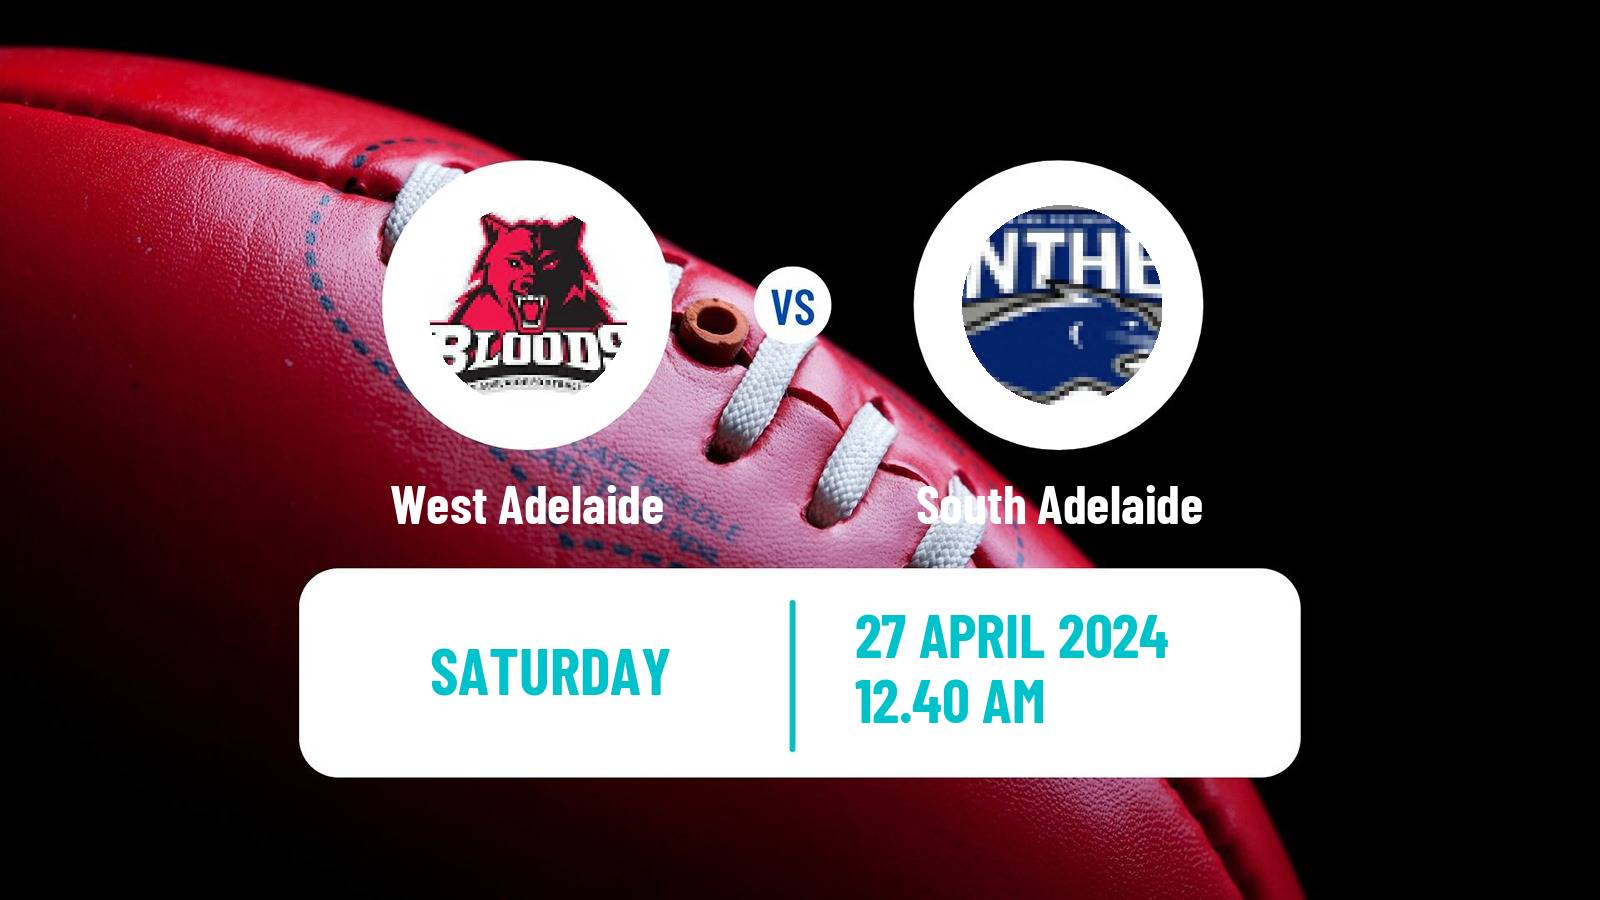 Aussie rules SANFL West Adelaide - South Adelaide